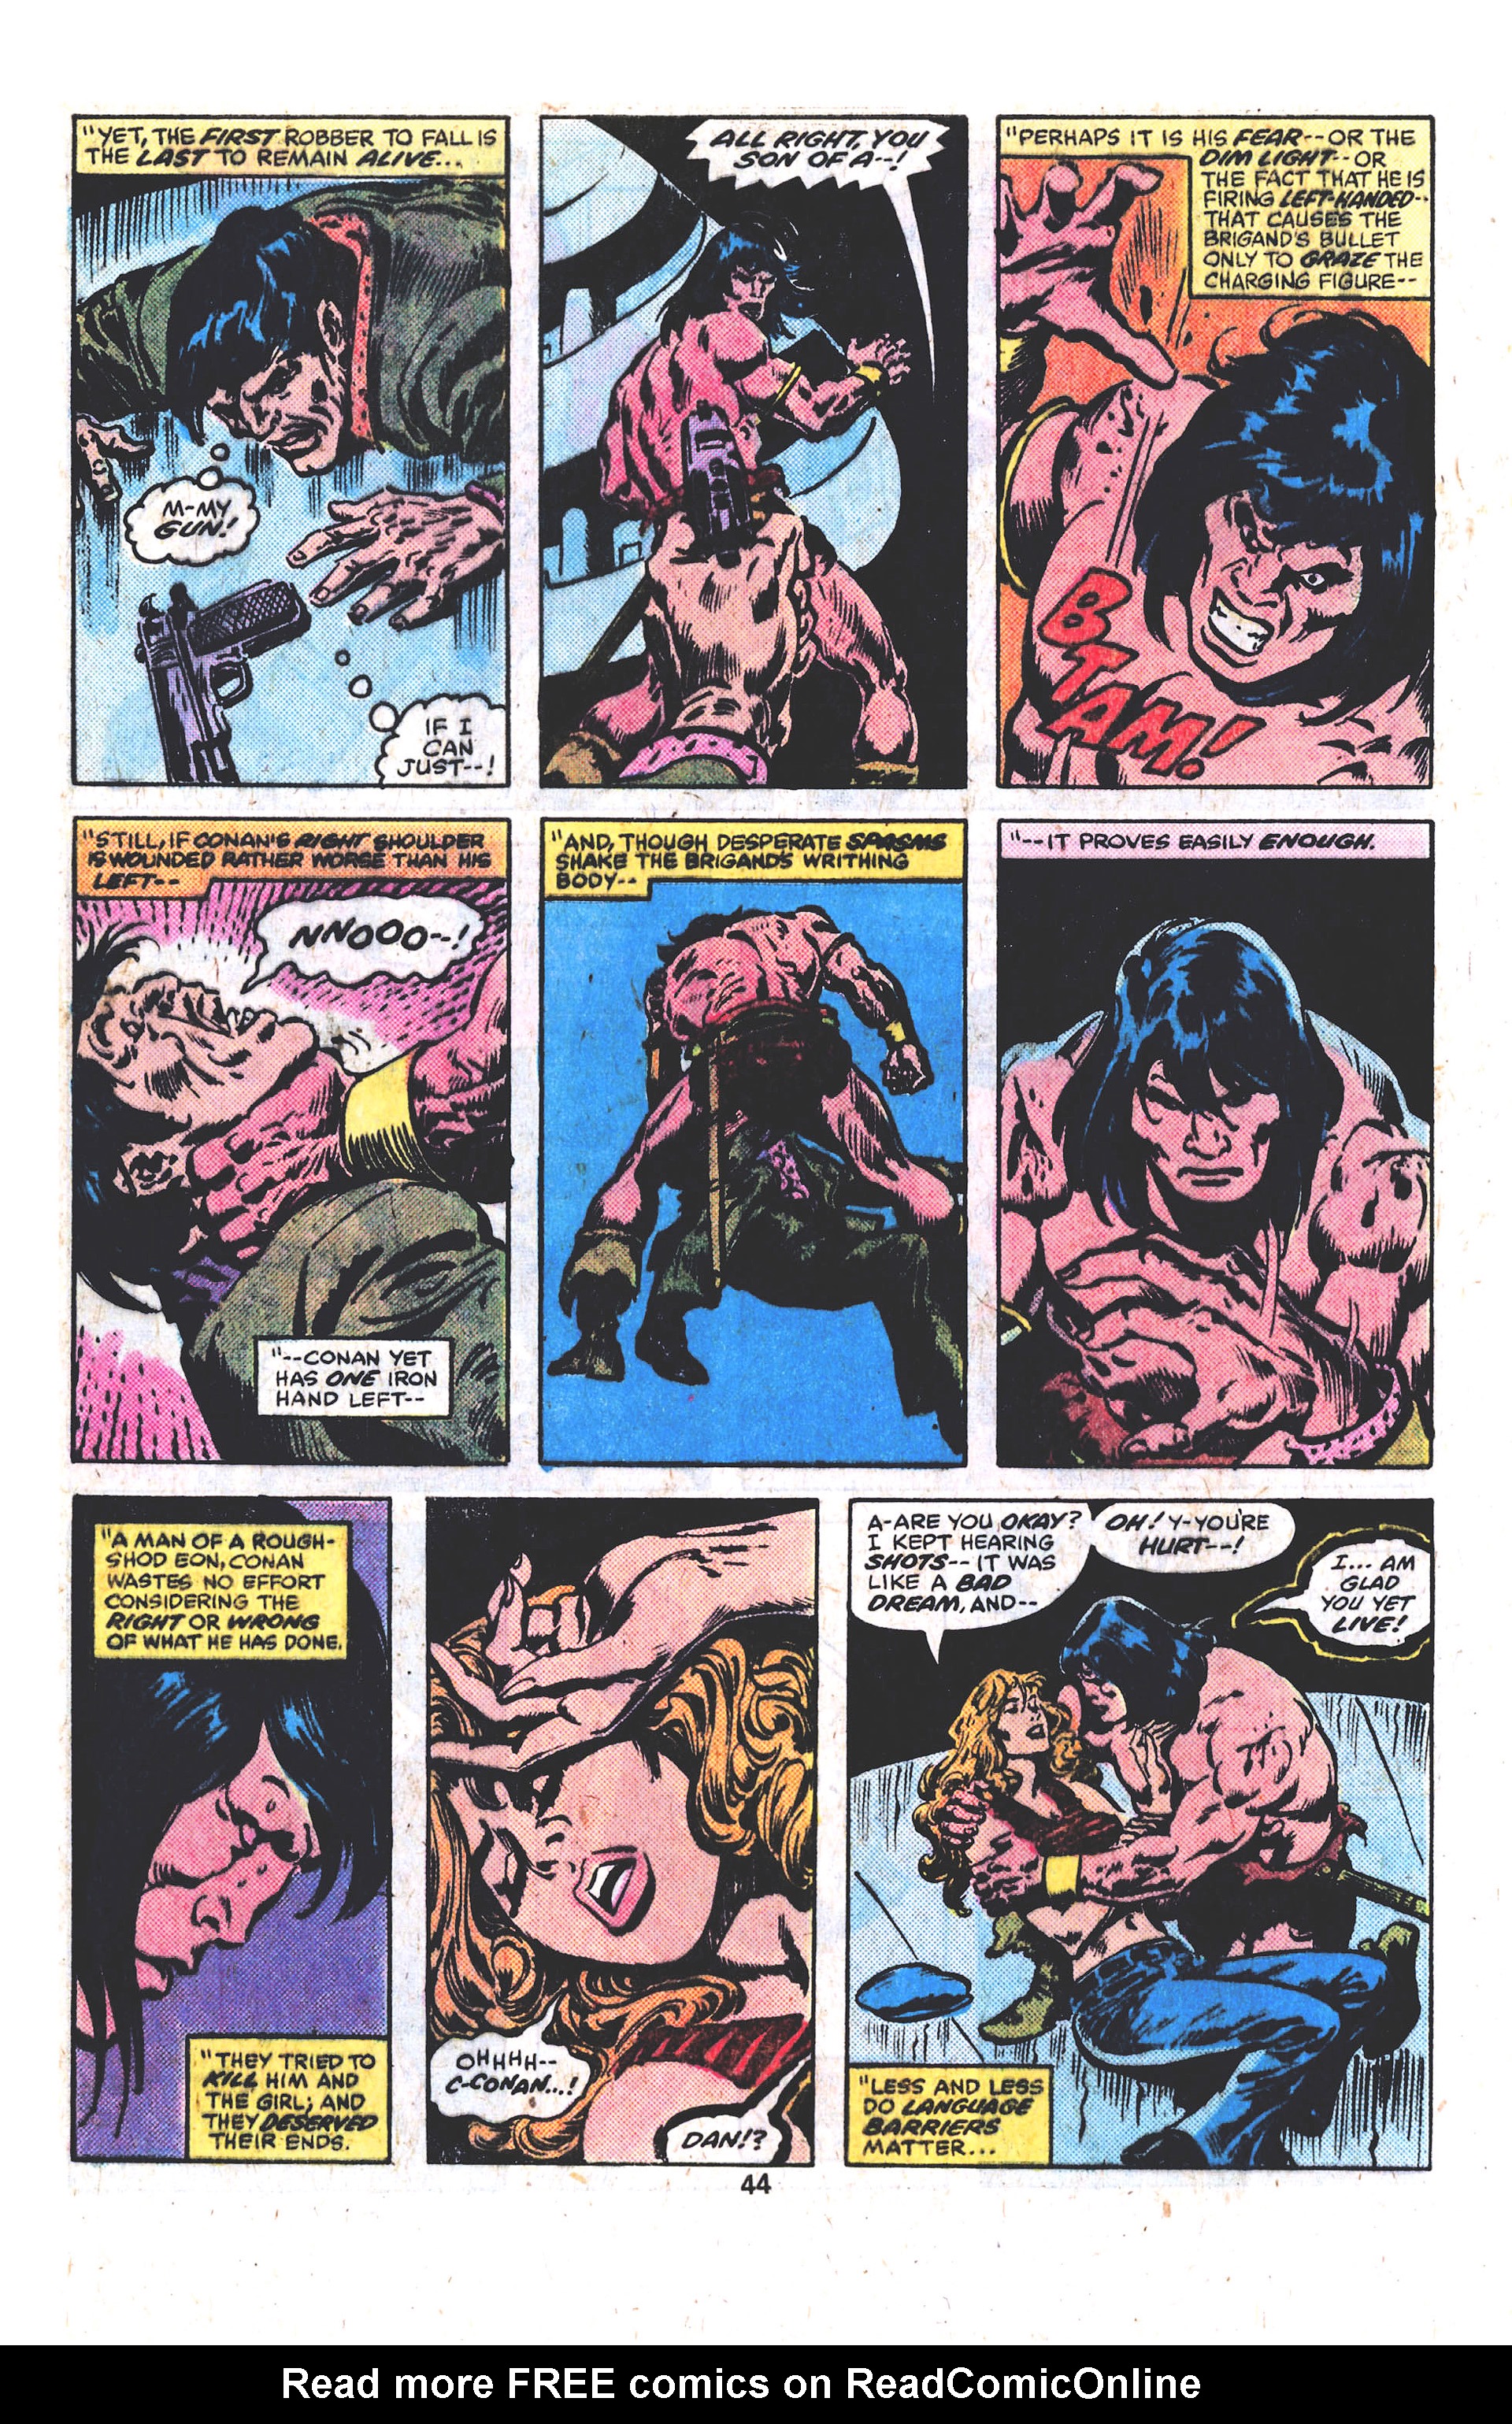 What If? (1977) Issue #13 - Conan The Barbarian walked the Earth Today #13 - English 33